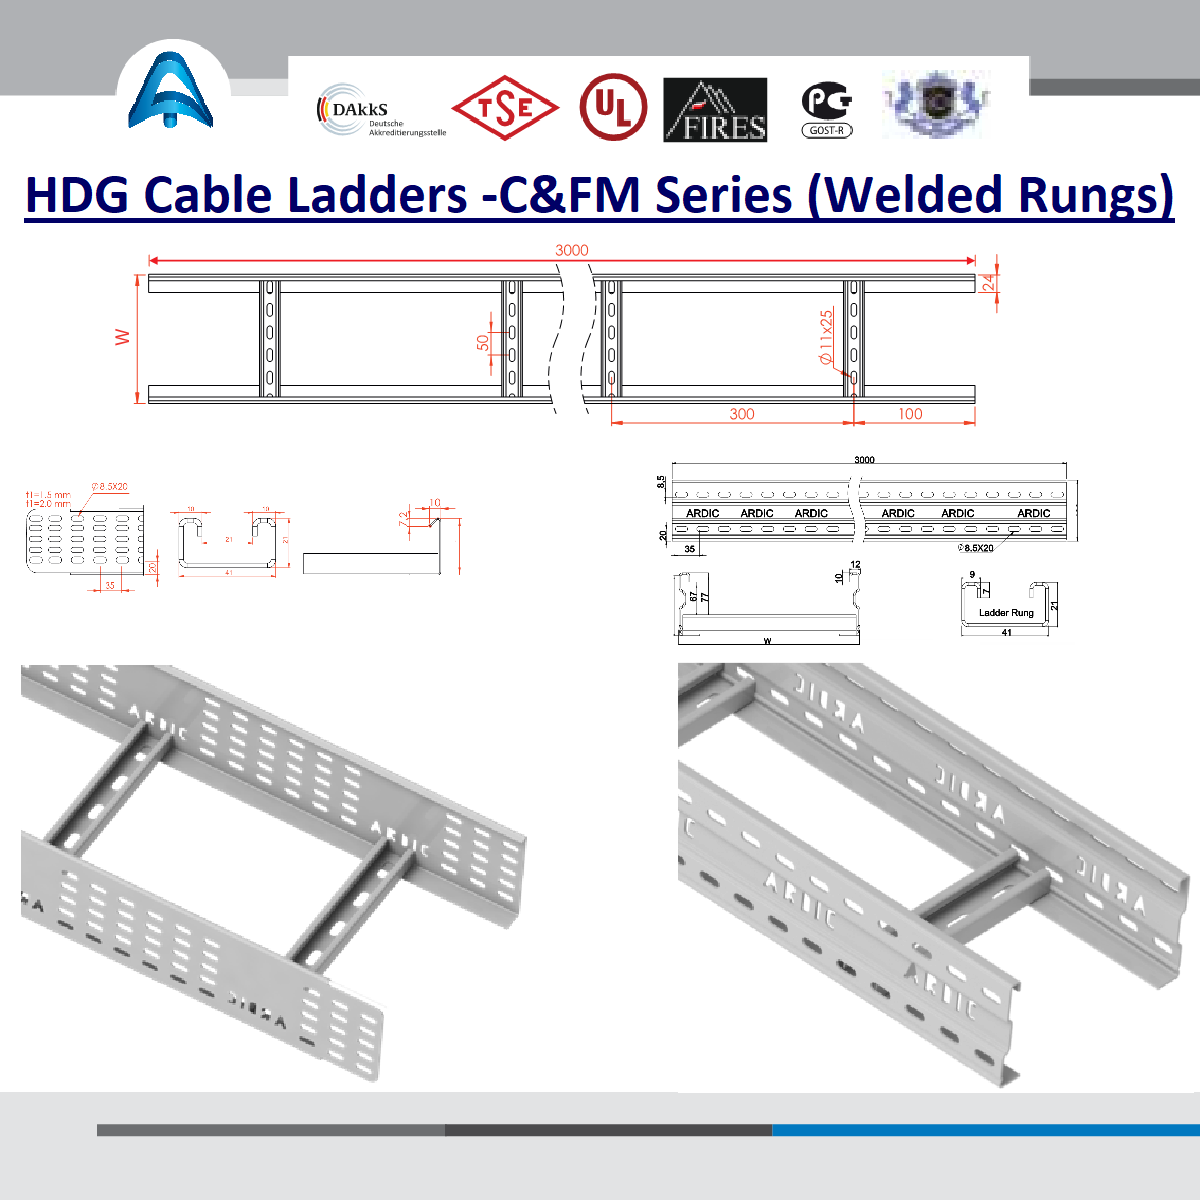 C & FM Series HDG Cable Ladders (Welded Rungs)